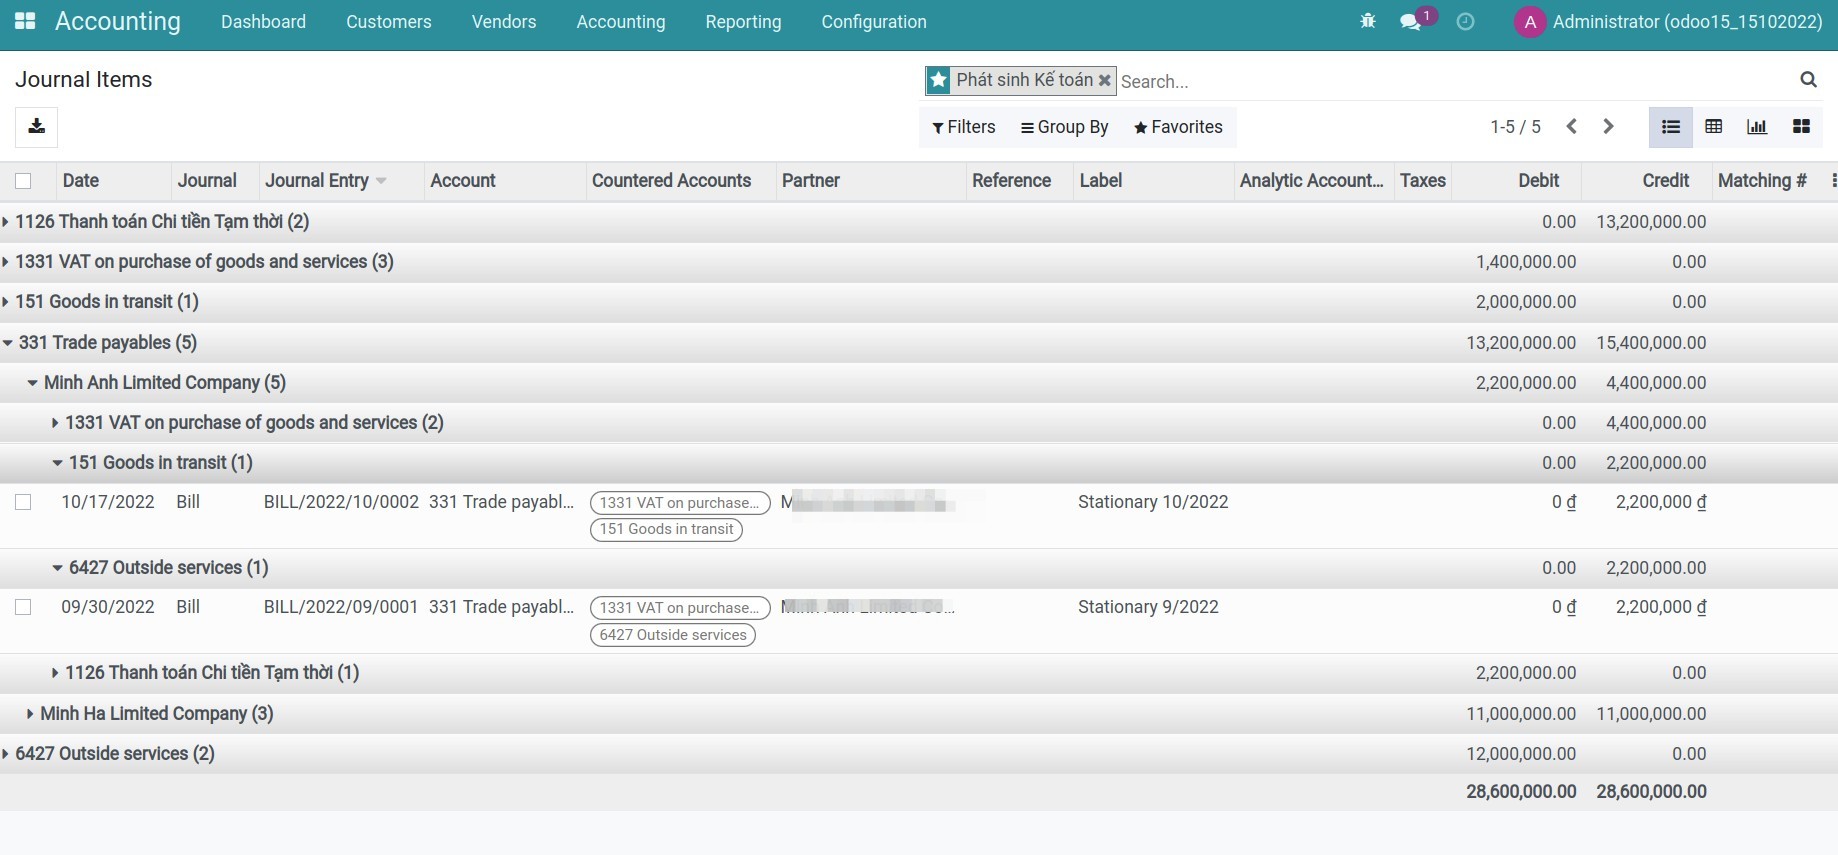 search the information related to countered accounts by the filter/groups tool